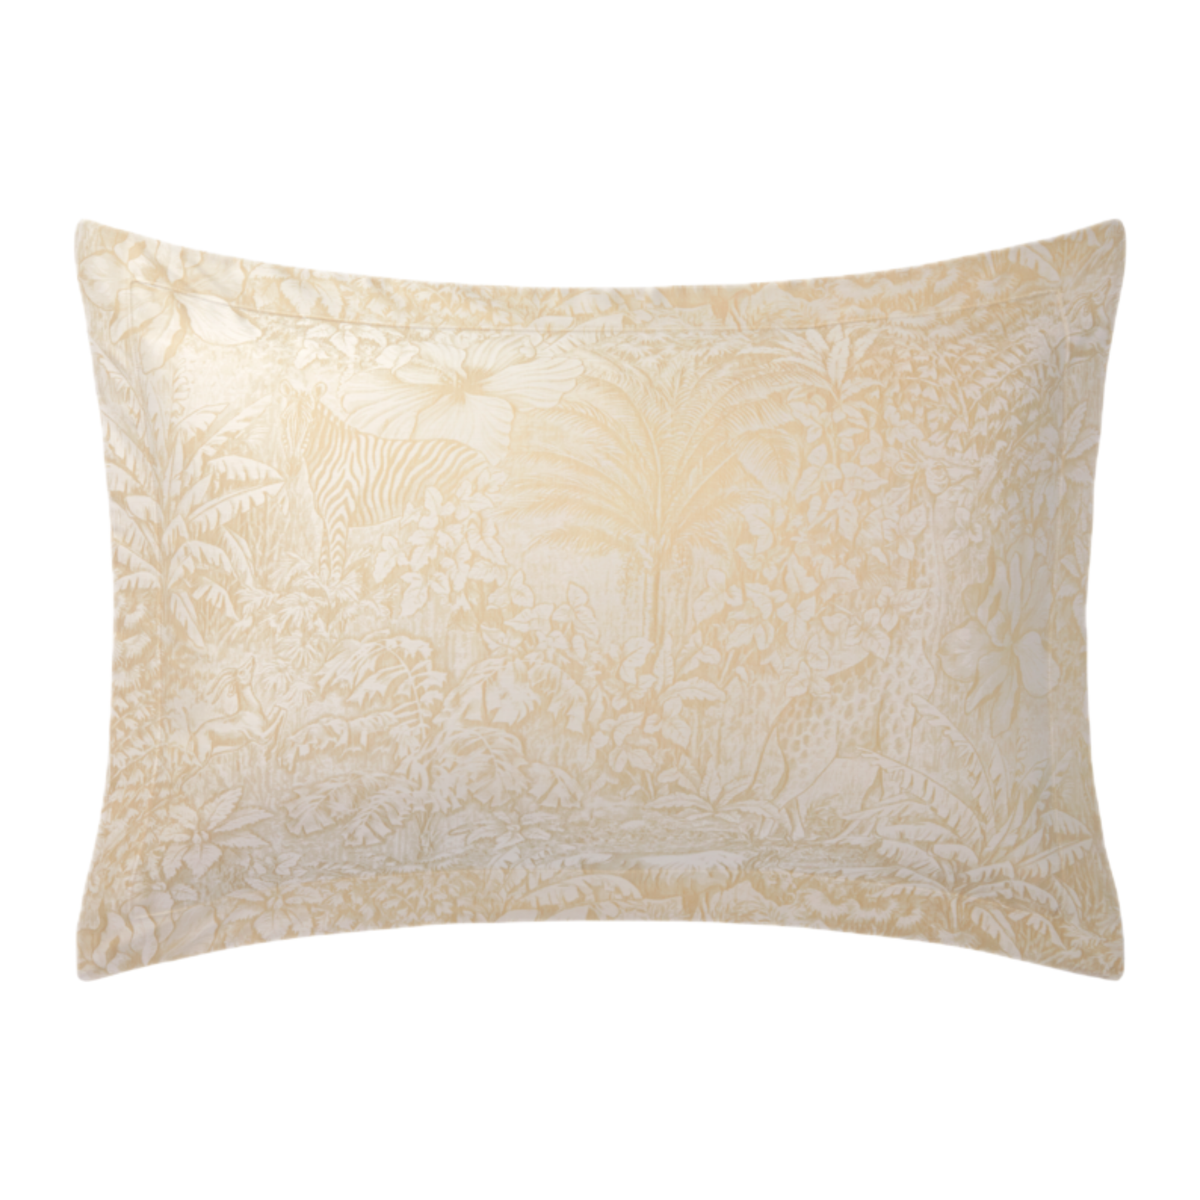 Sham of Yves Delorme Faune Bedding